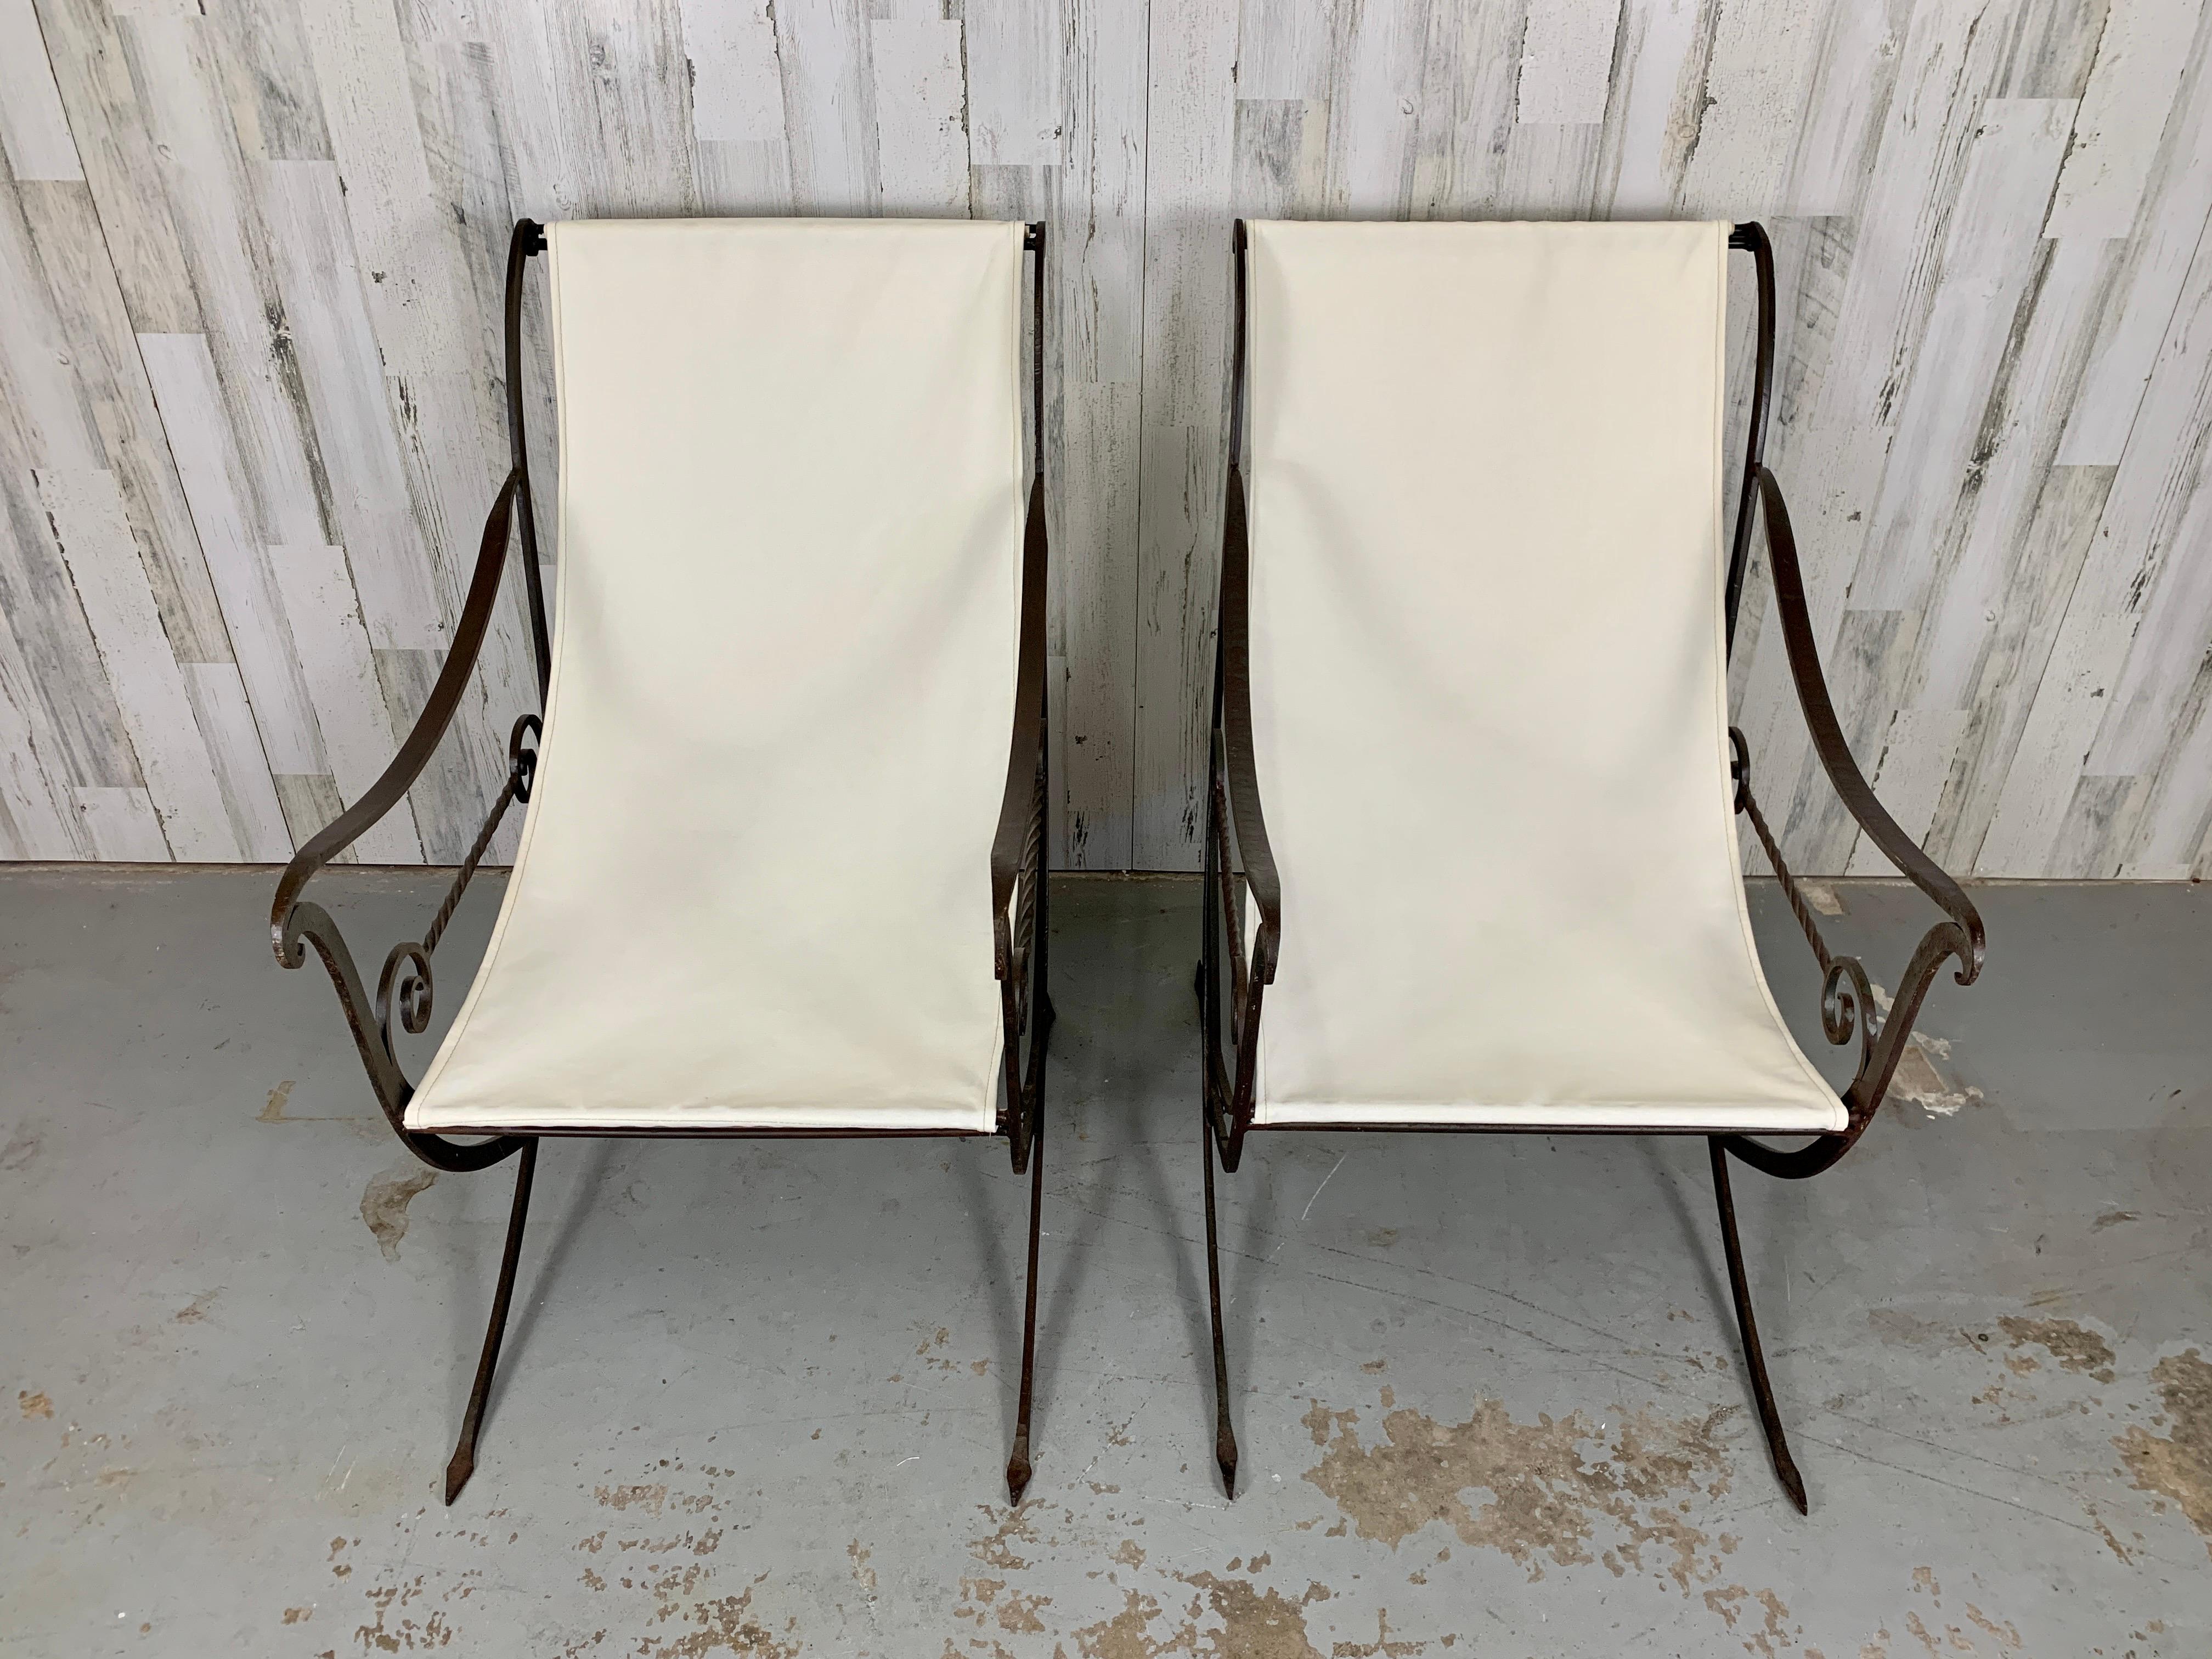 Sculpted Forged Iron Sling Chairs, 1940's In Good Condition For Sale In Denton, TX